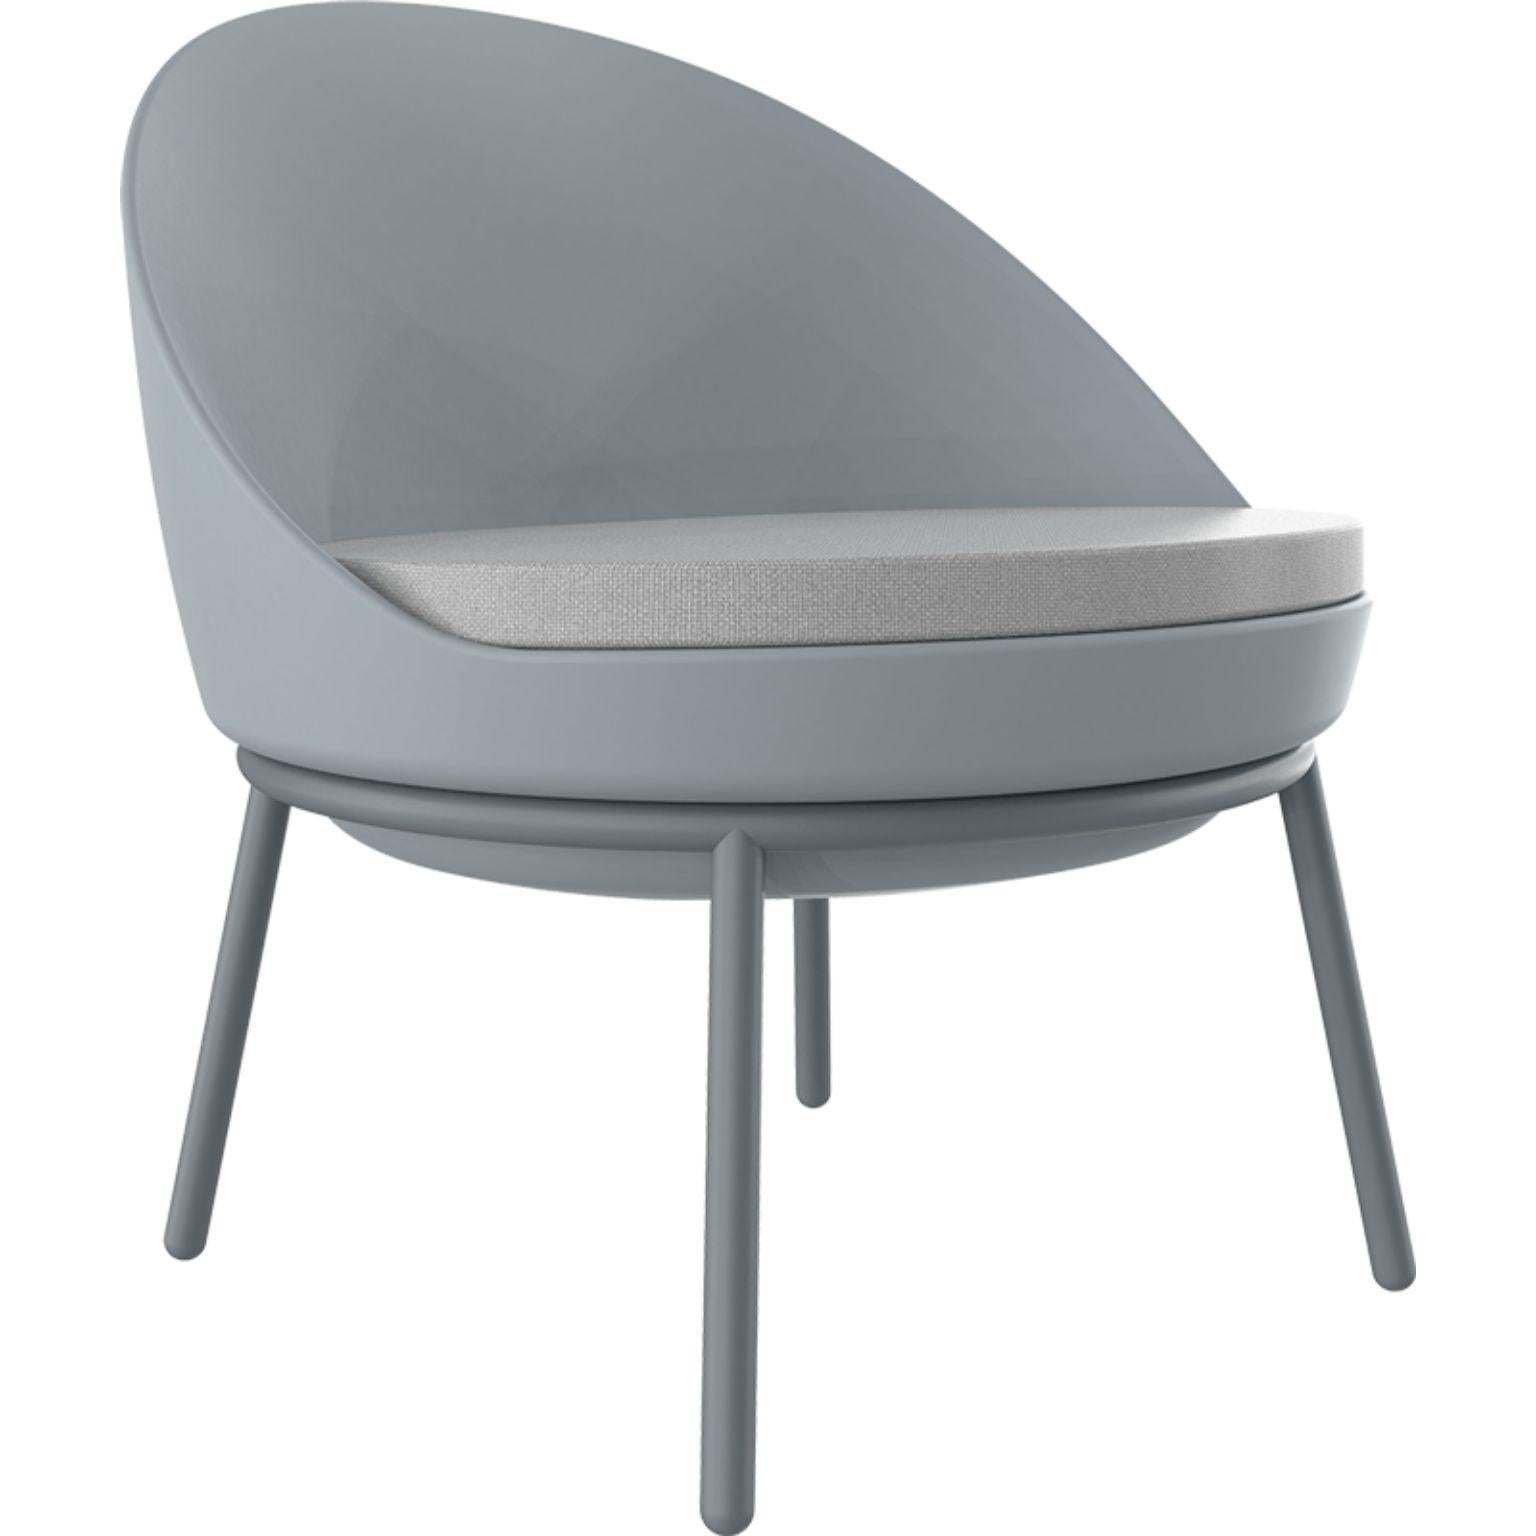 Lace grey lounge chair with cushion by MOWEE
Dimensions: D70 x W66 x H75.5 cm
Material: Polyethylene, Stainless Steel
Weight: 10.5 kg
Also Available in different colours and finishes. 

Lace is a collection of furniture made by rotomoulding.